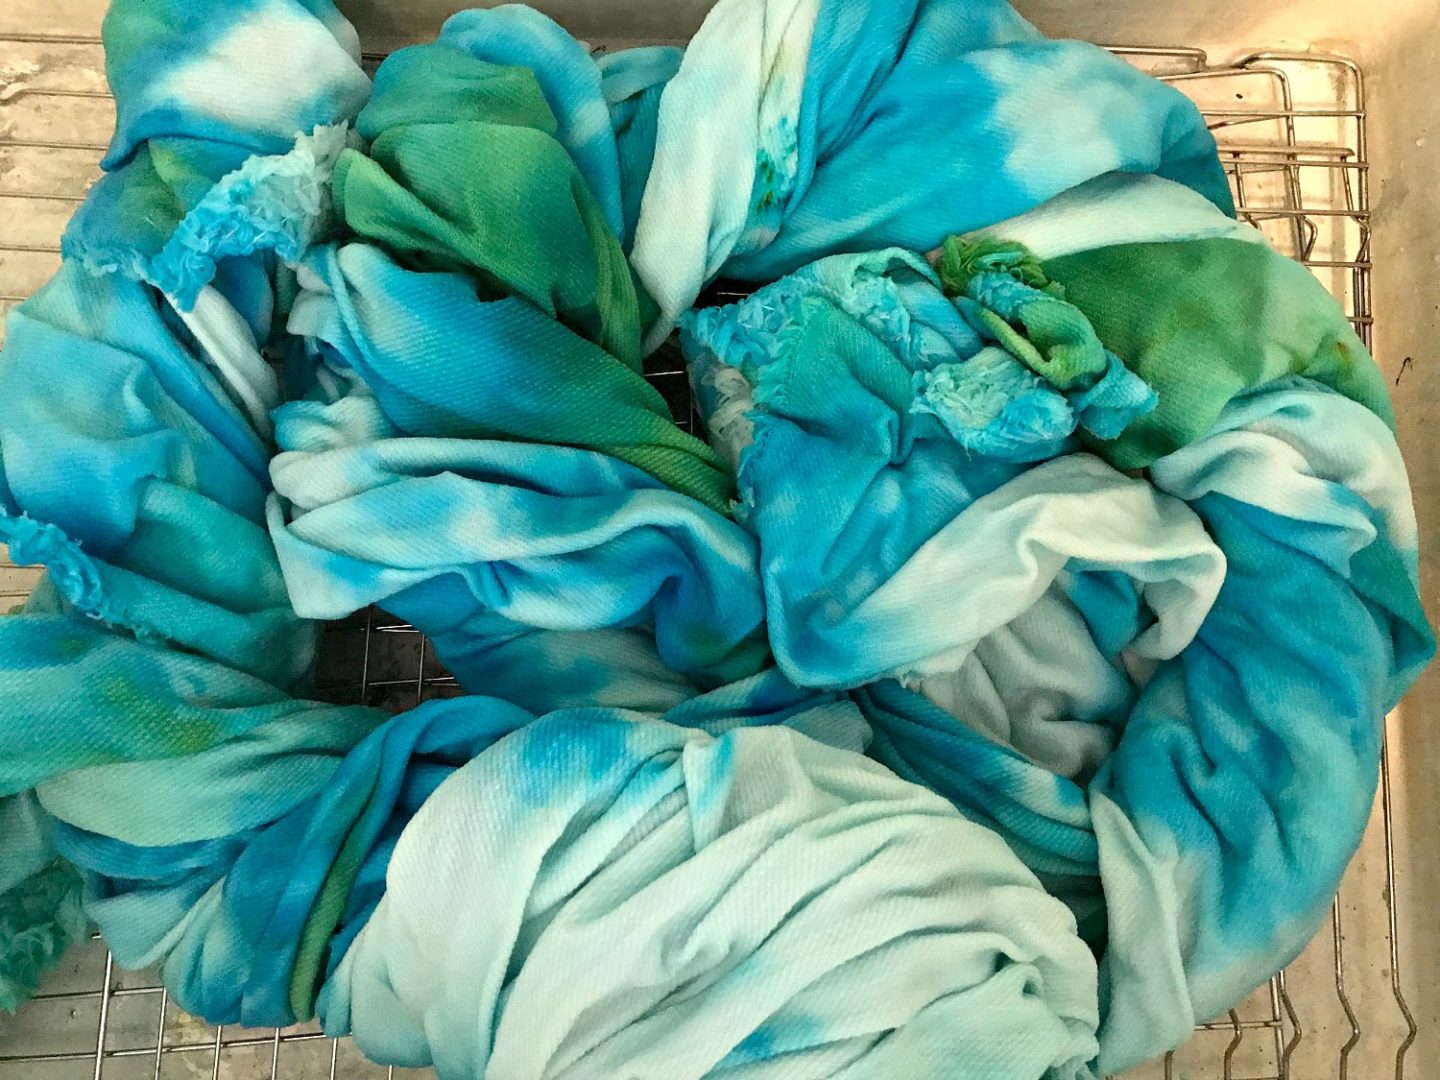 Procion Dye Parakeet Used in Ice Dyeing Project on Cotton